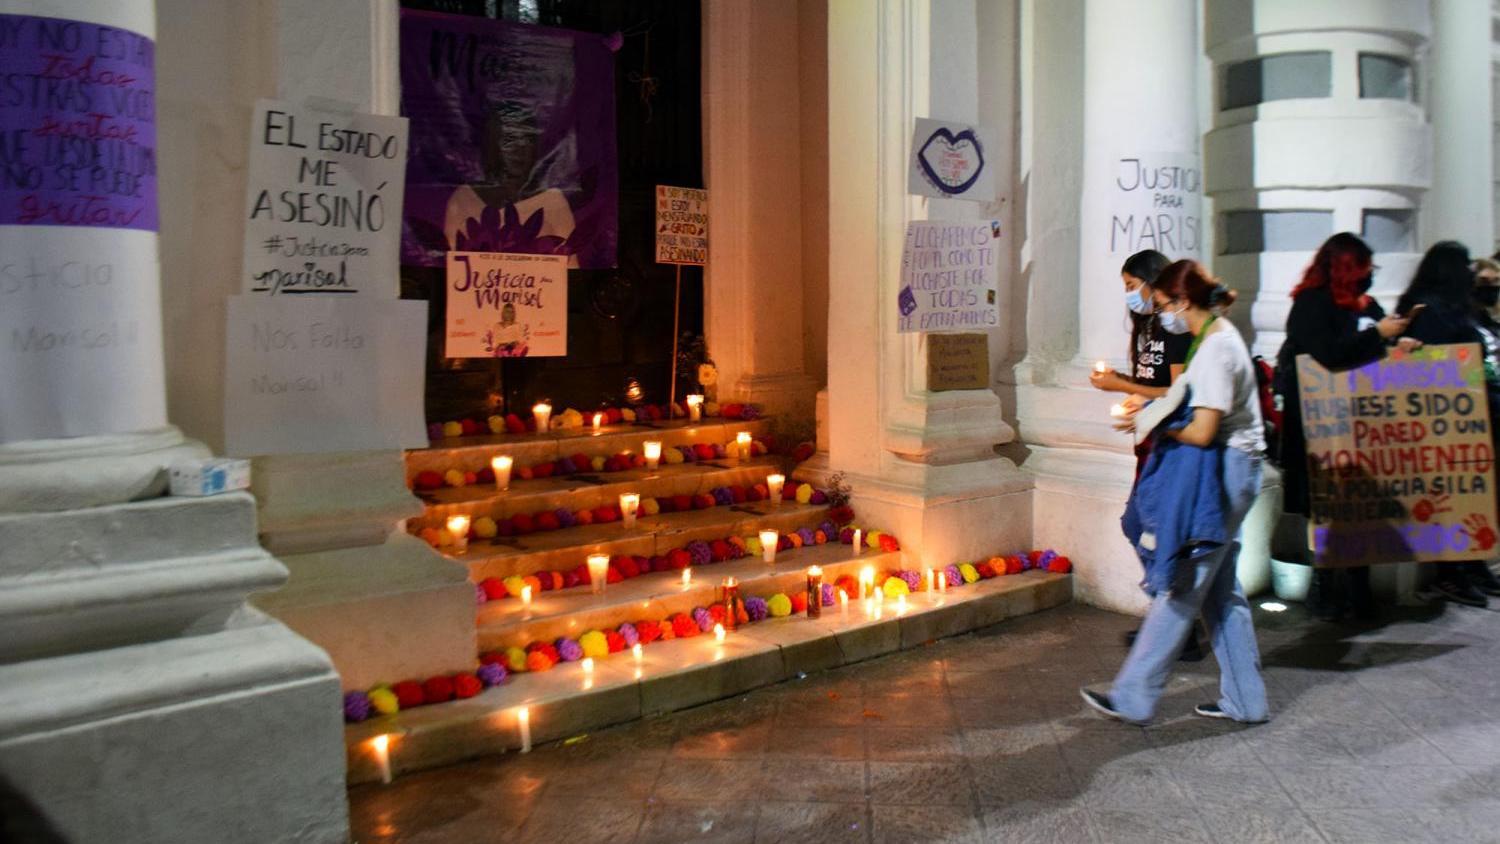 Women set candles under a poster calling for “Justice for Marisol” during a vigil on Sunday, Nov. 28, 2021 in Hermosillo, Sonora, for Marisol Cuadras, who was killed last week in Guaymas.